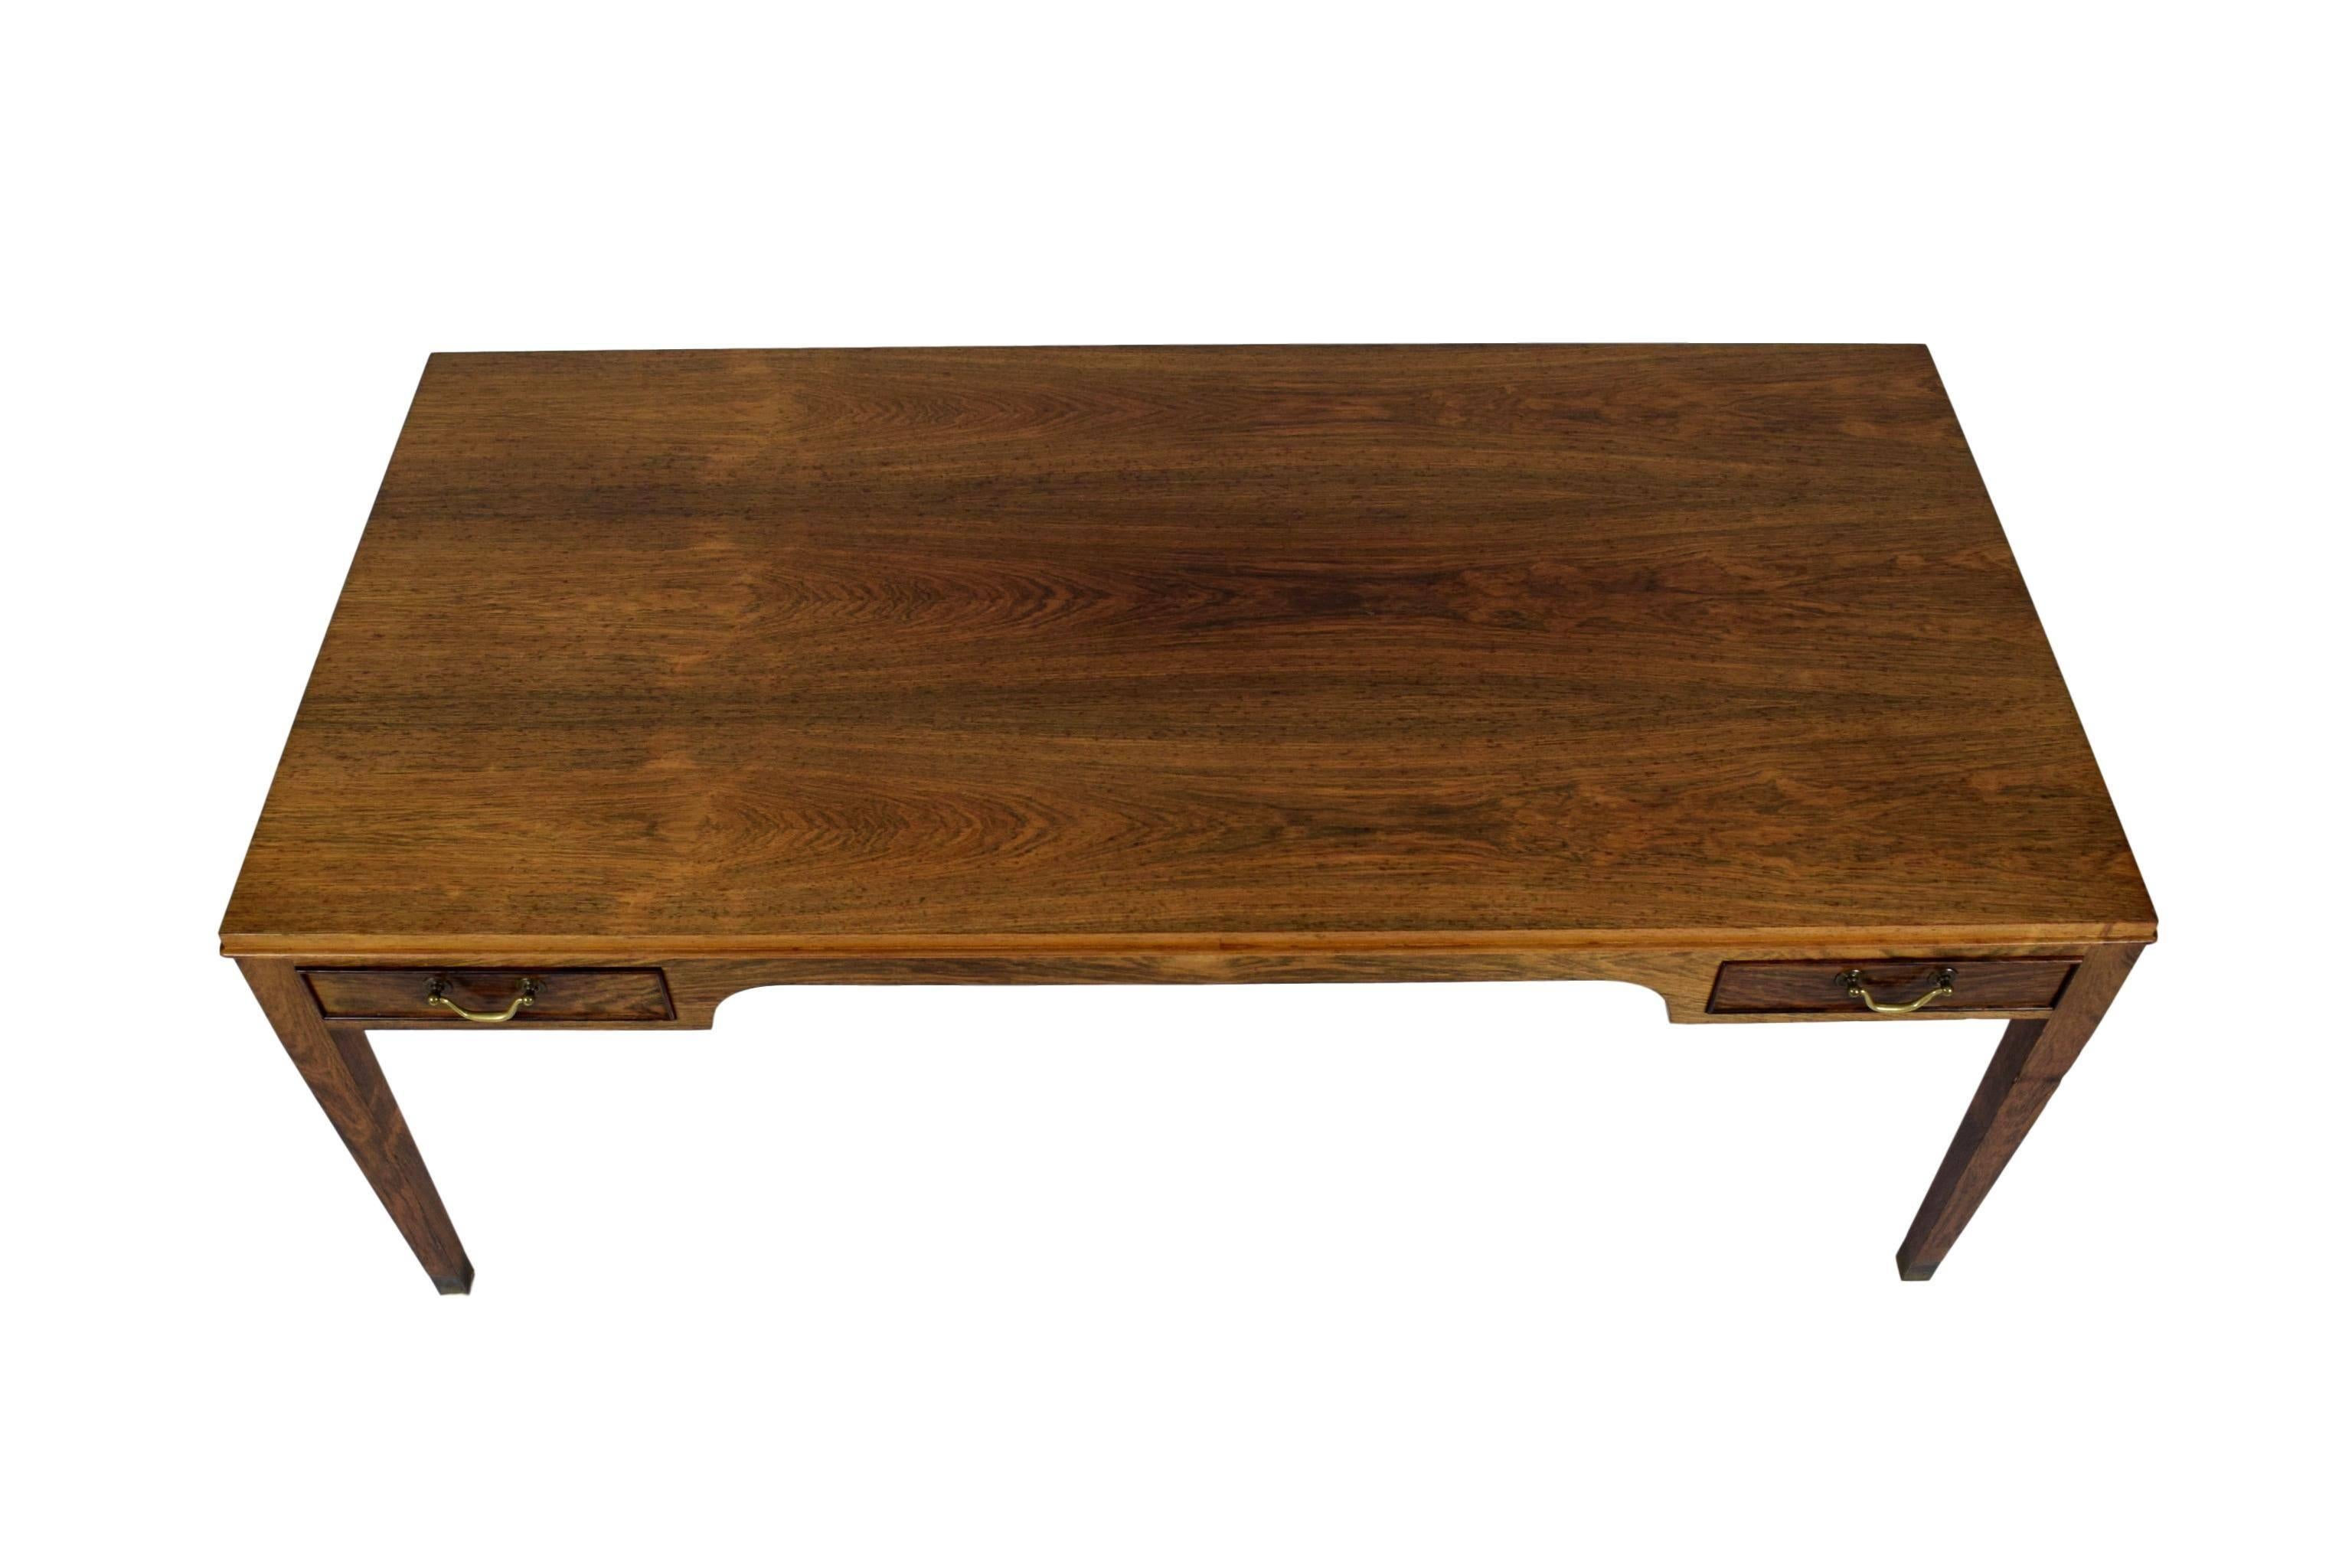 Scandinavian Modern Danish Midcentury Coffee Table by Frits Henningsen, Four Drawers, Brass Handles For Sale